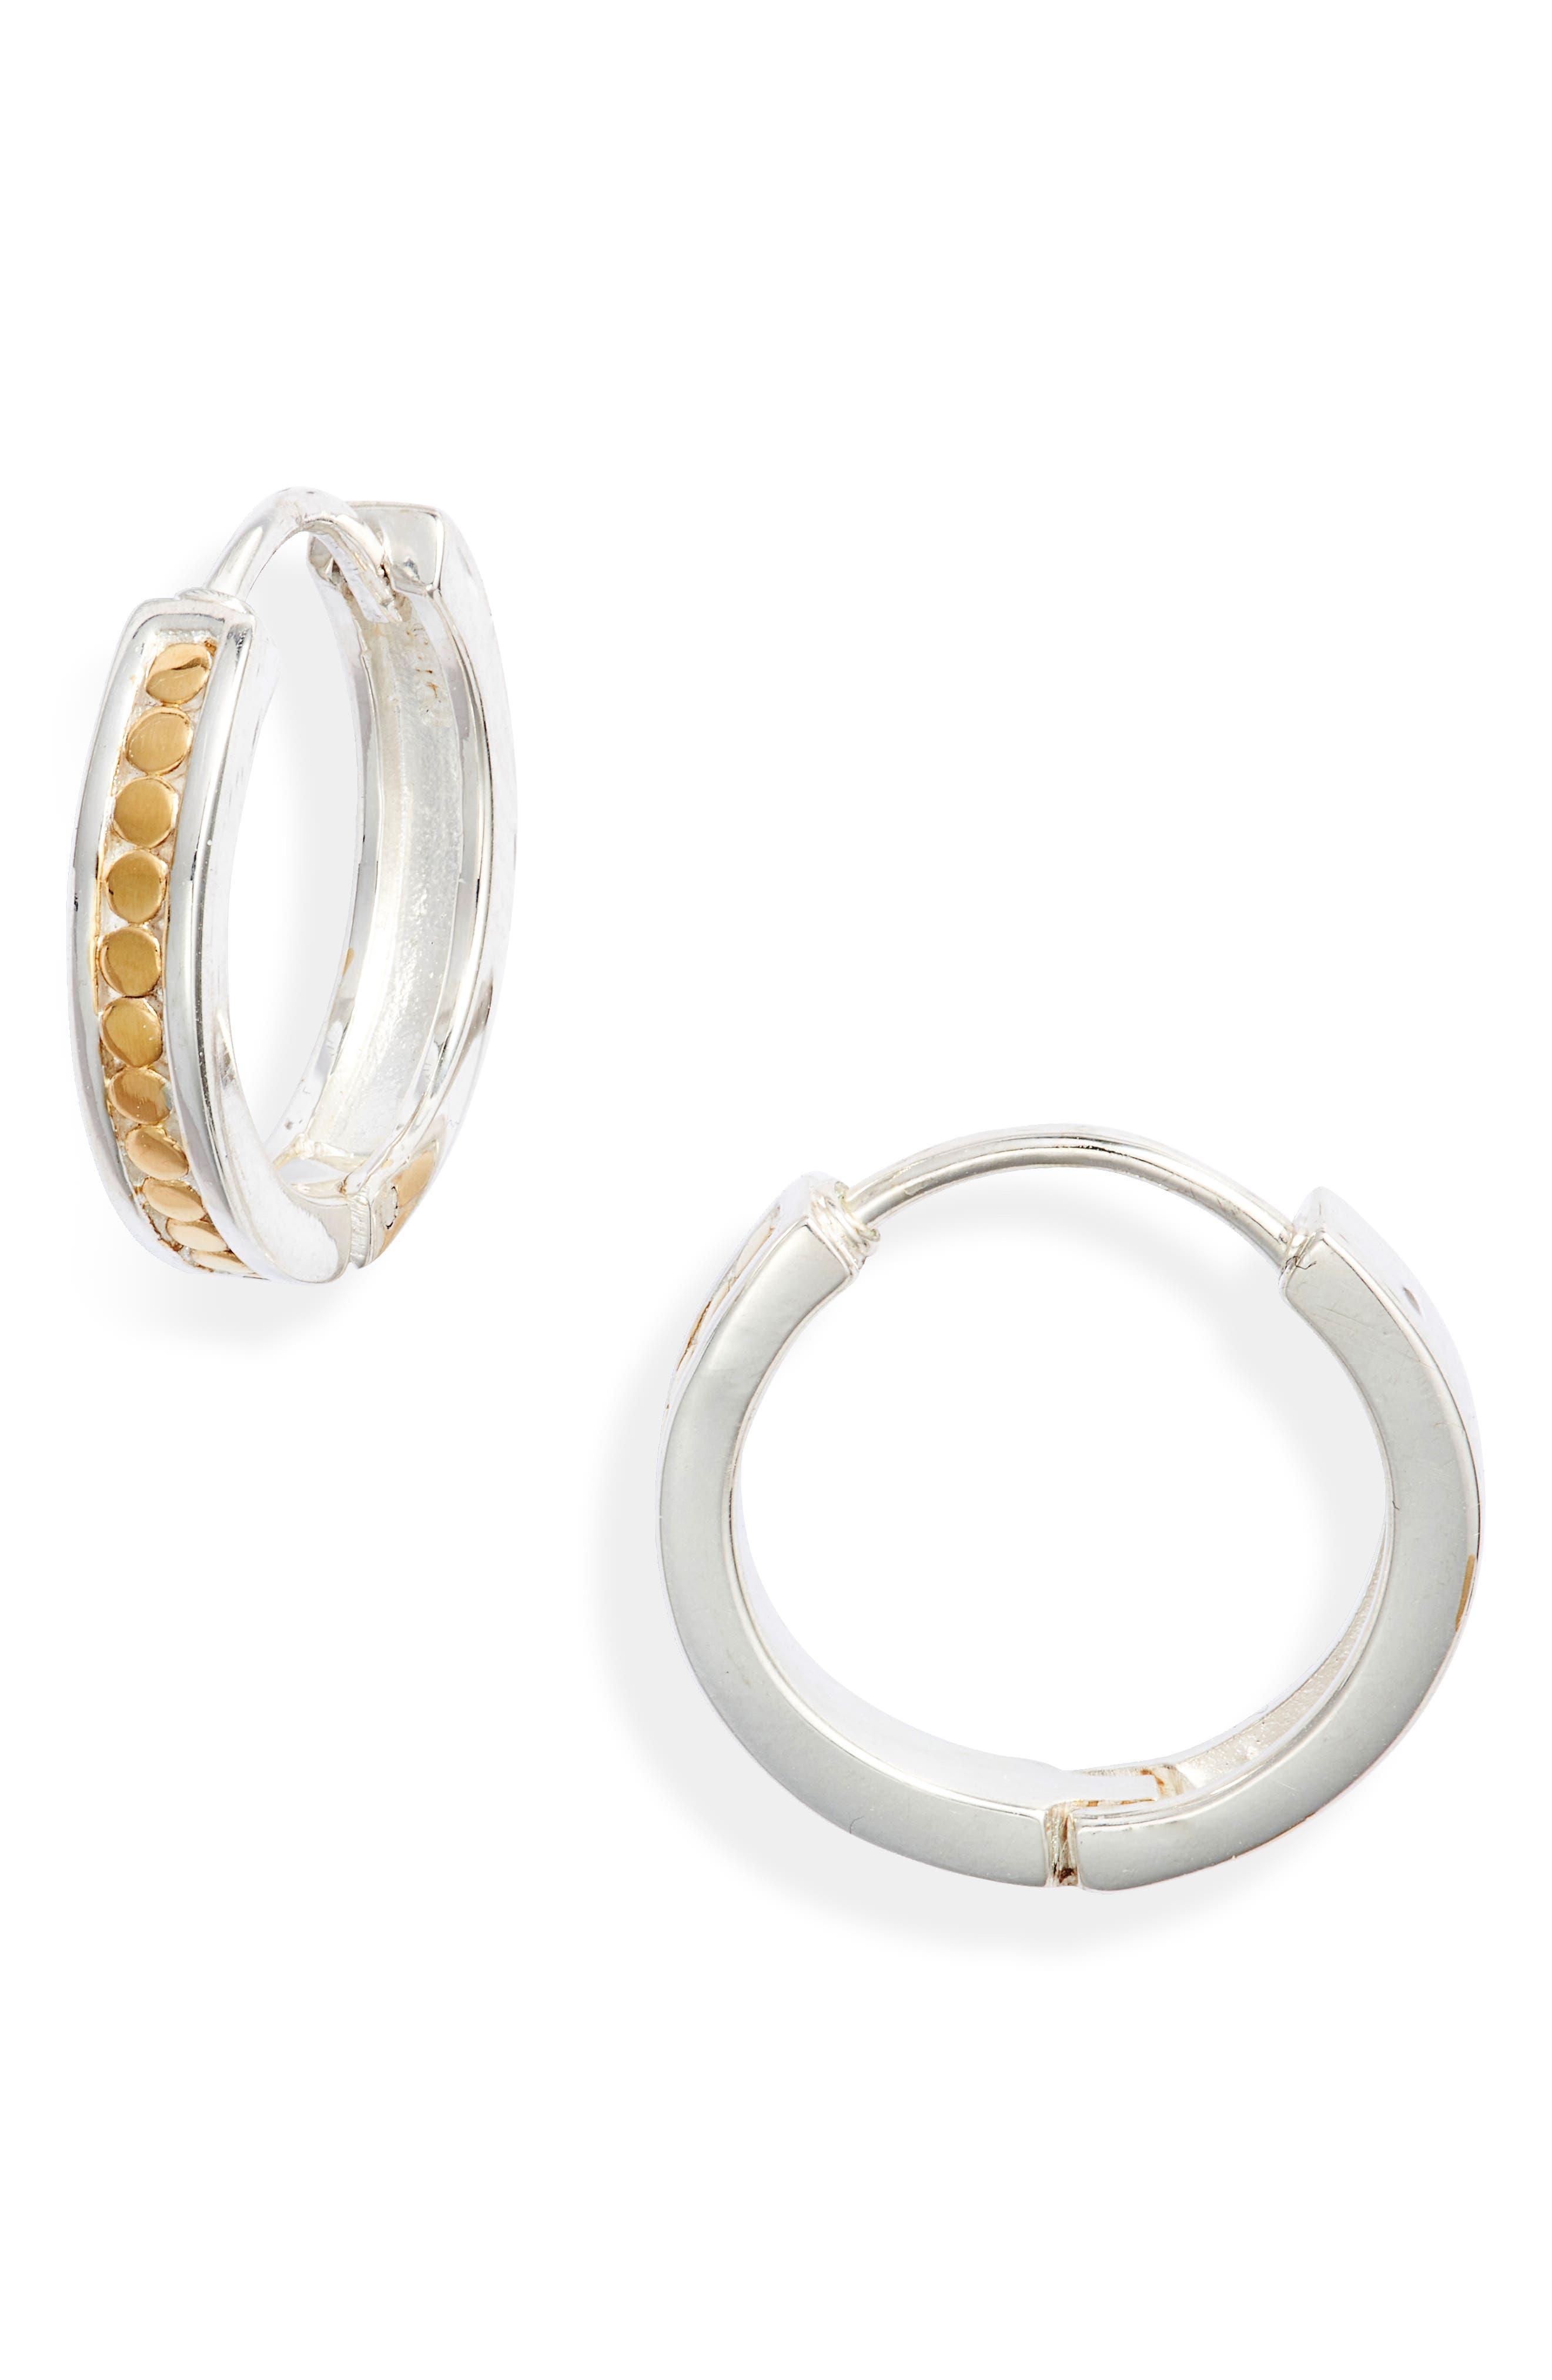 Anna Beck Small Classic Hoop Earrings in White | Lyst